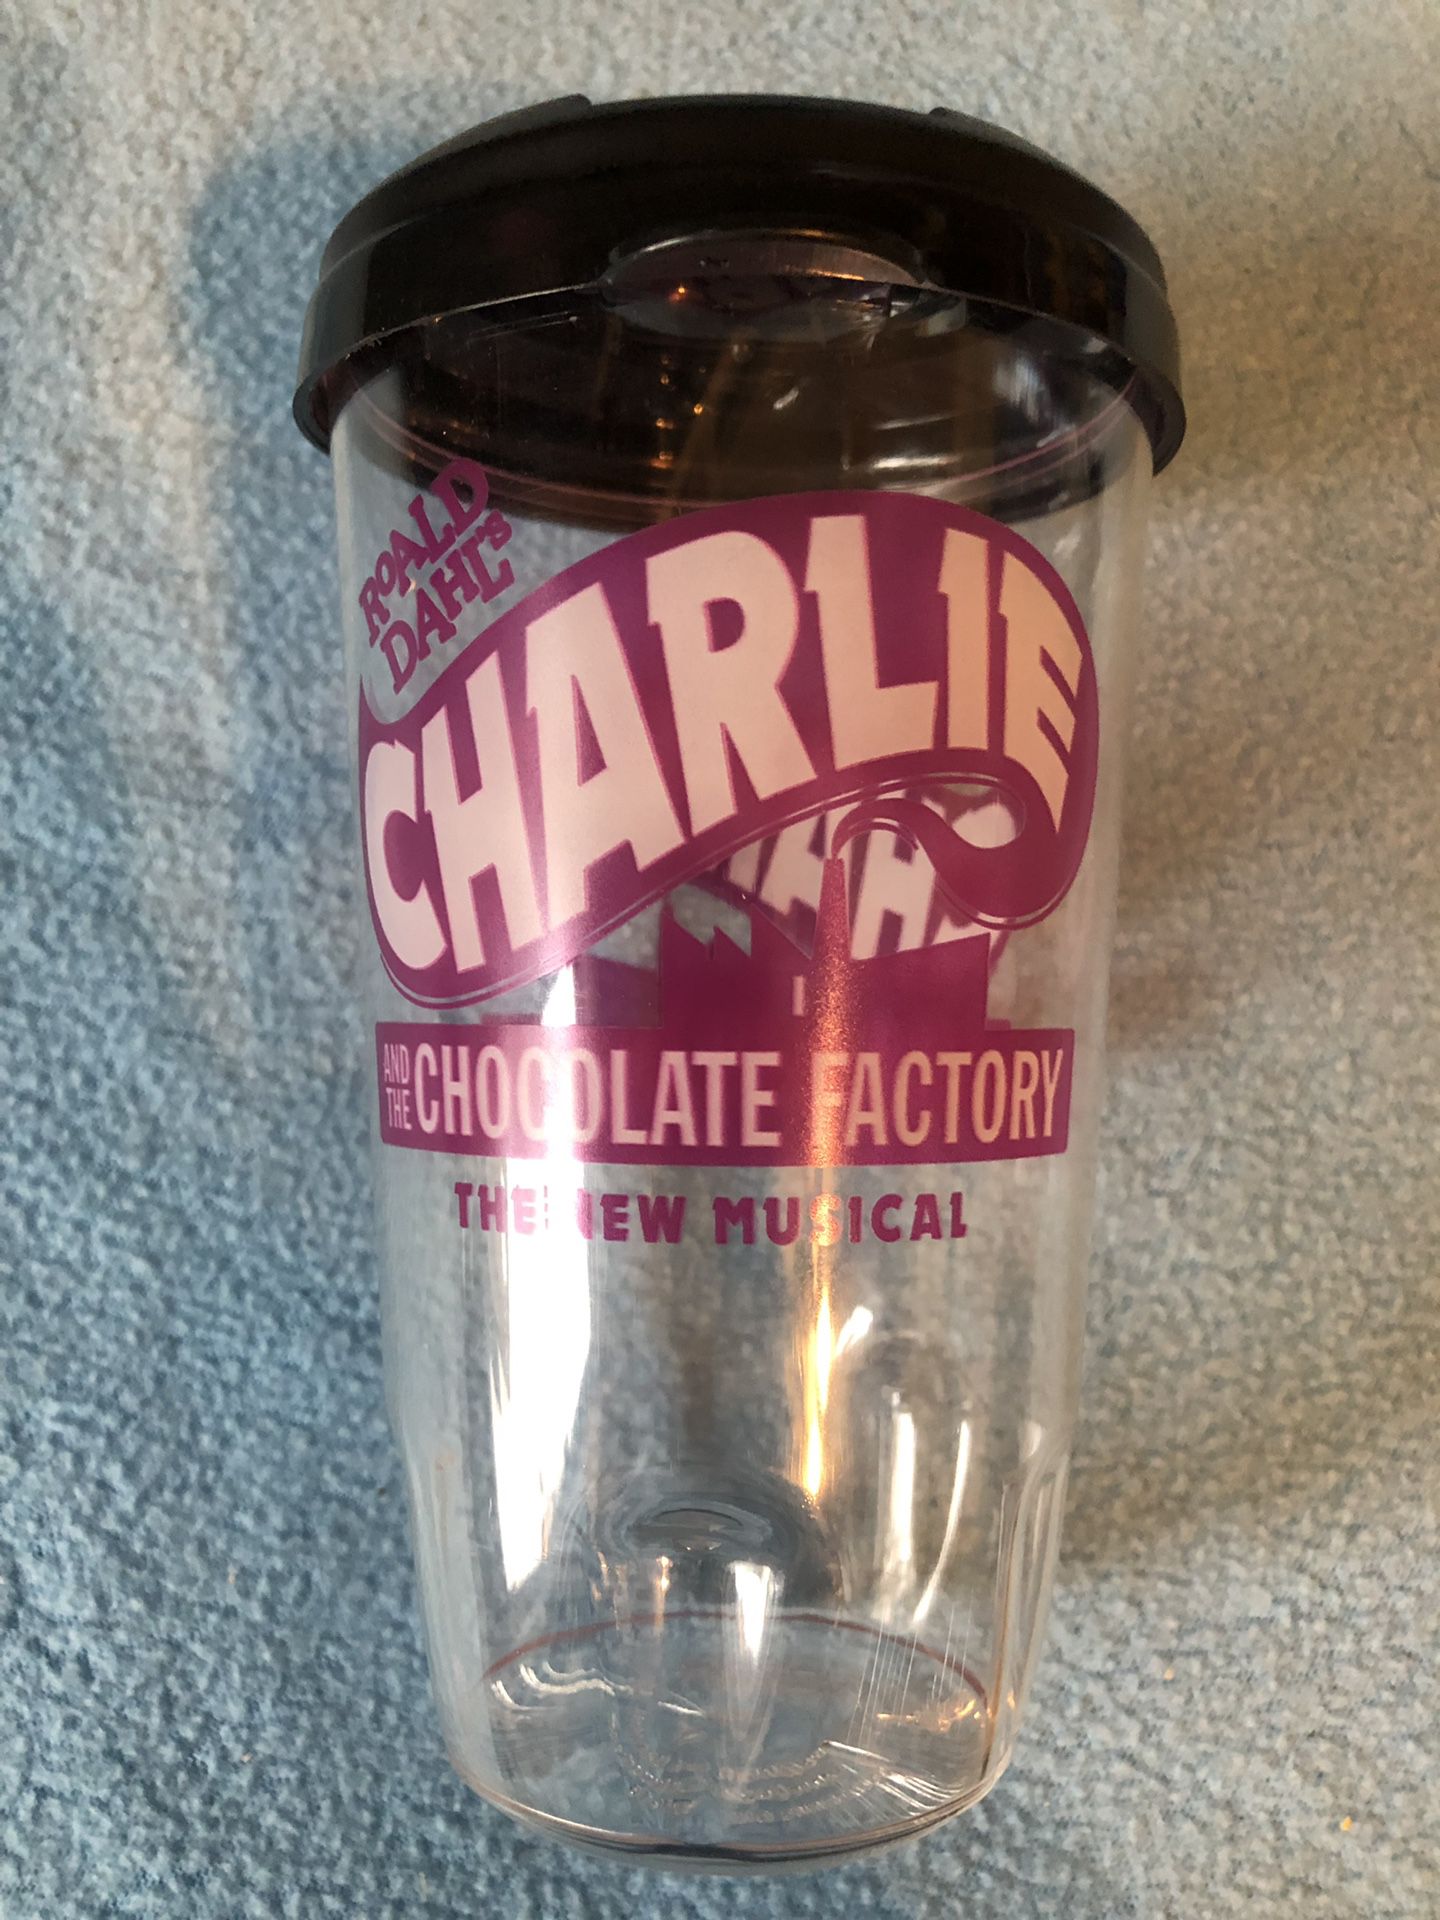 Charlie and the chocolate factory broadway musical playbill Cup